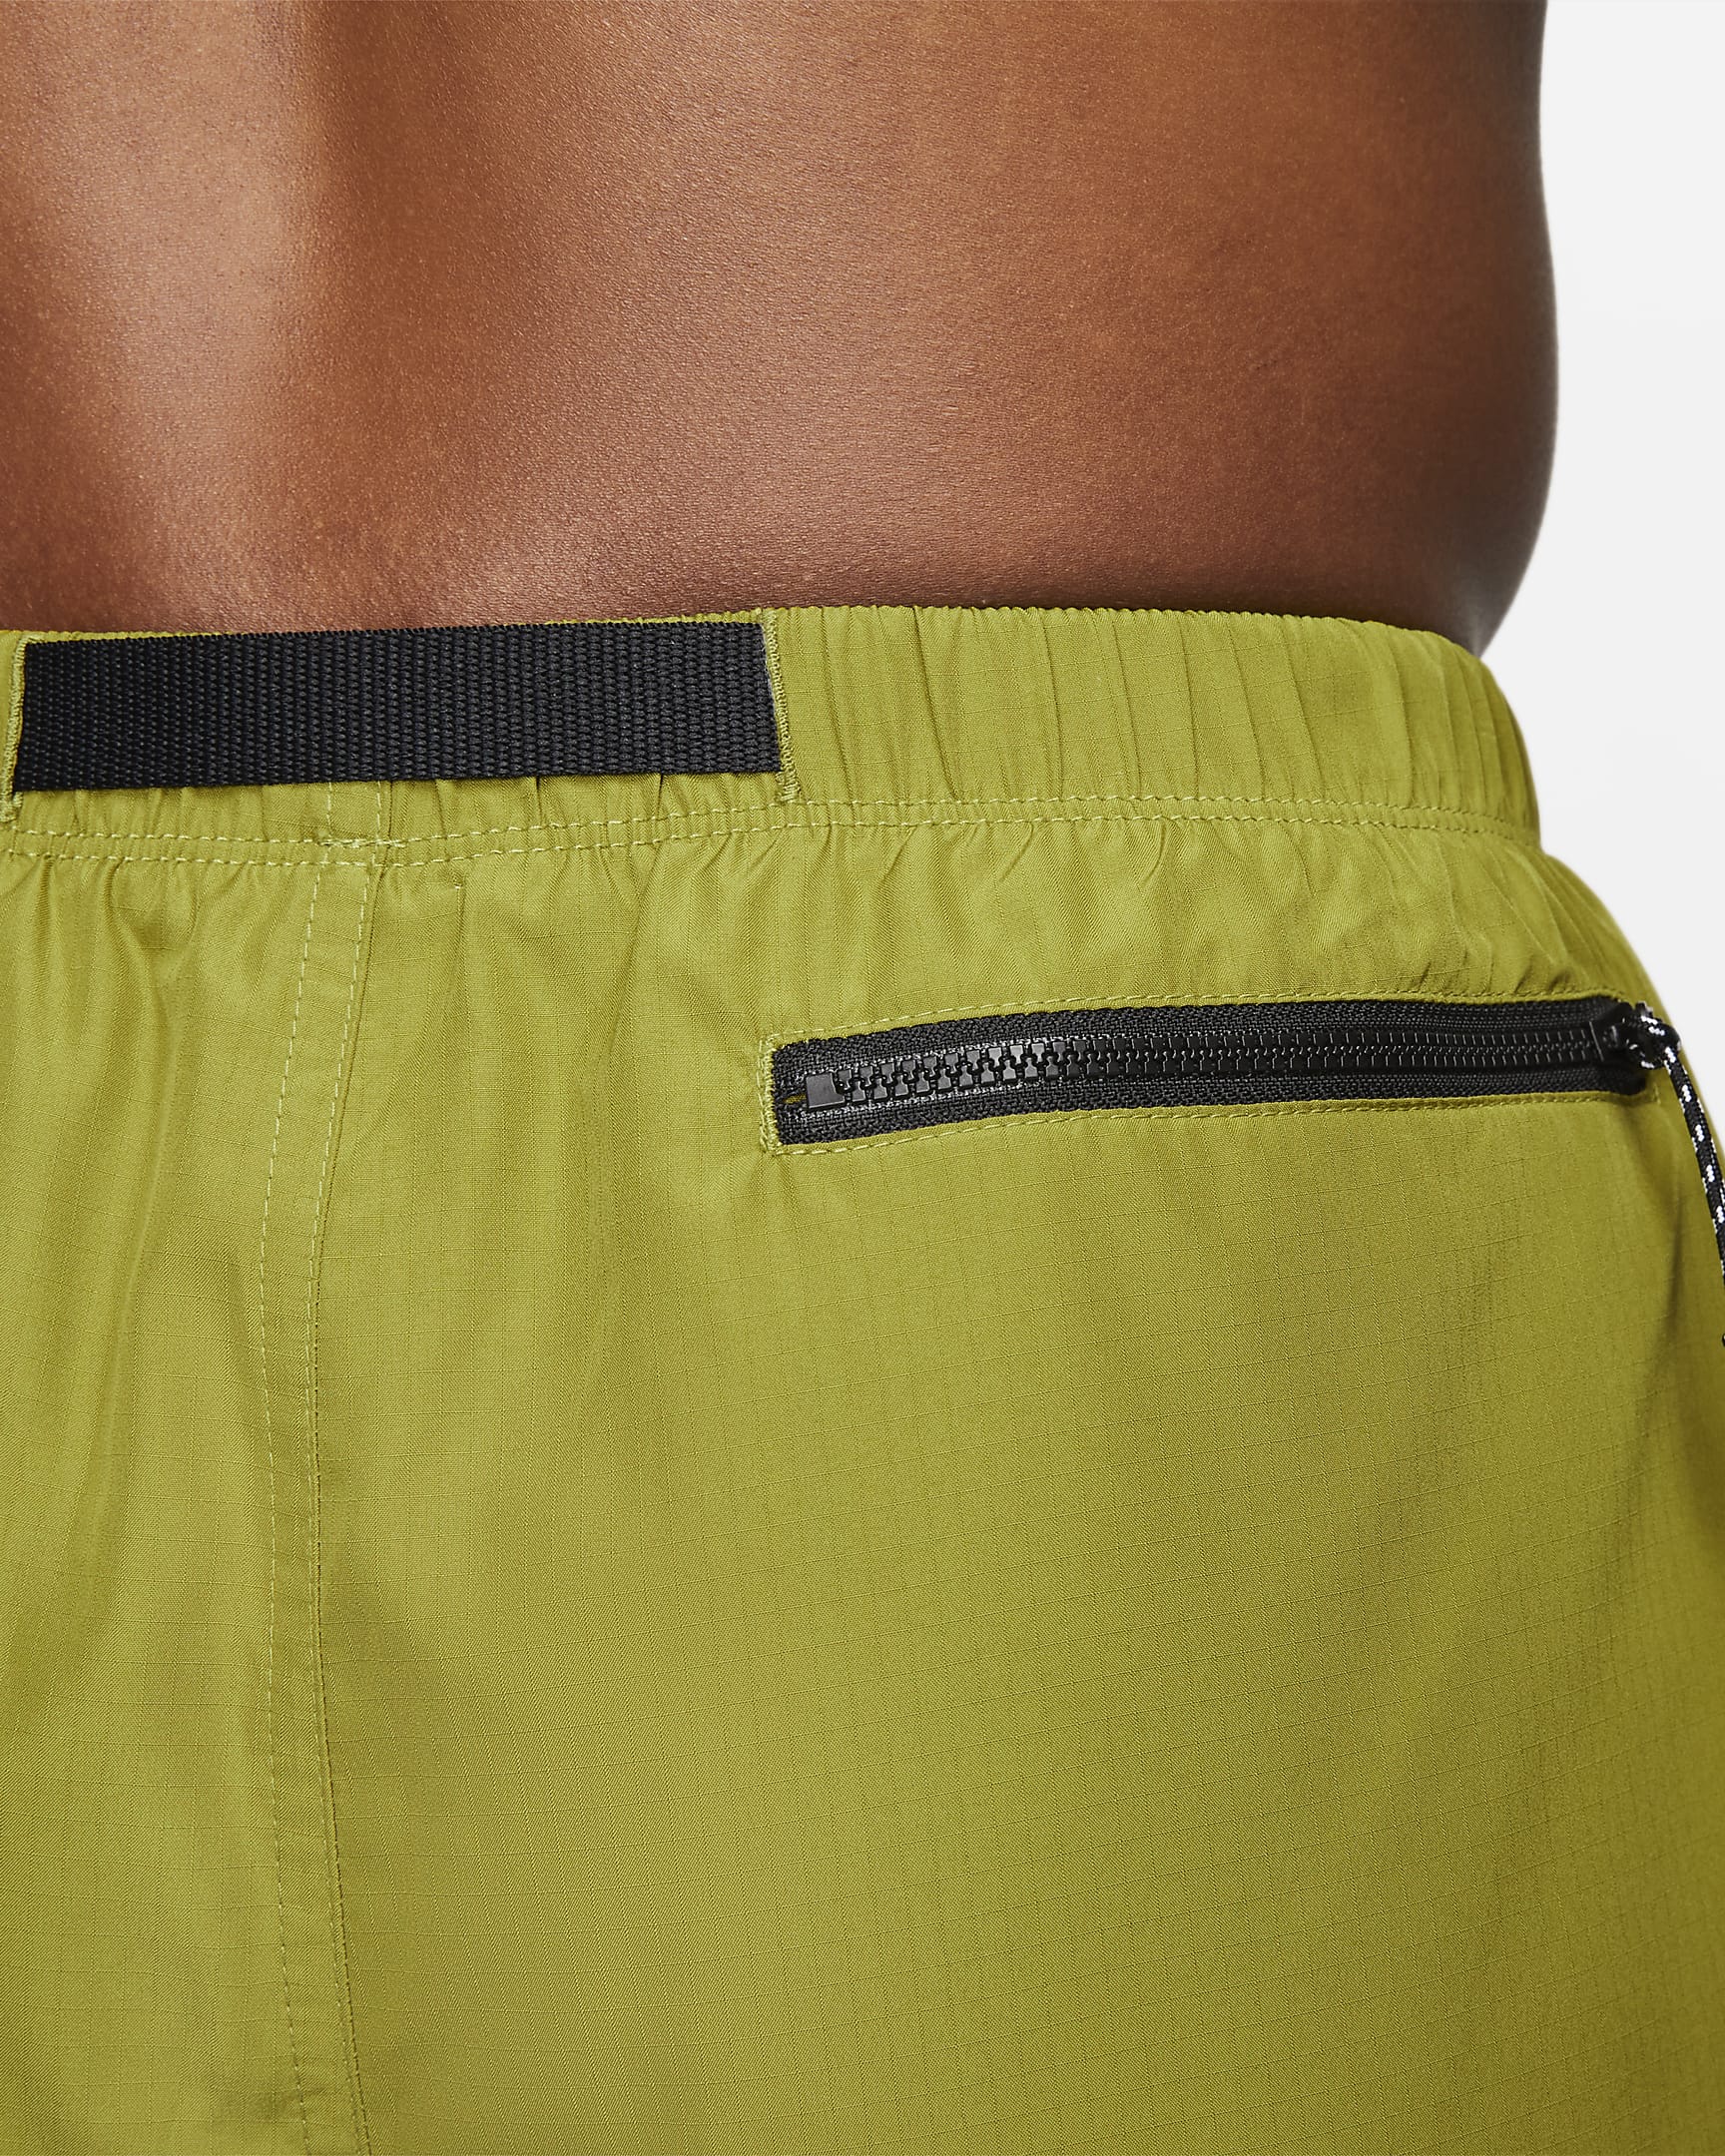 Nike Men's 13cm (approx.) Belted Packable Swimming Trunks. Nike SI